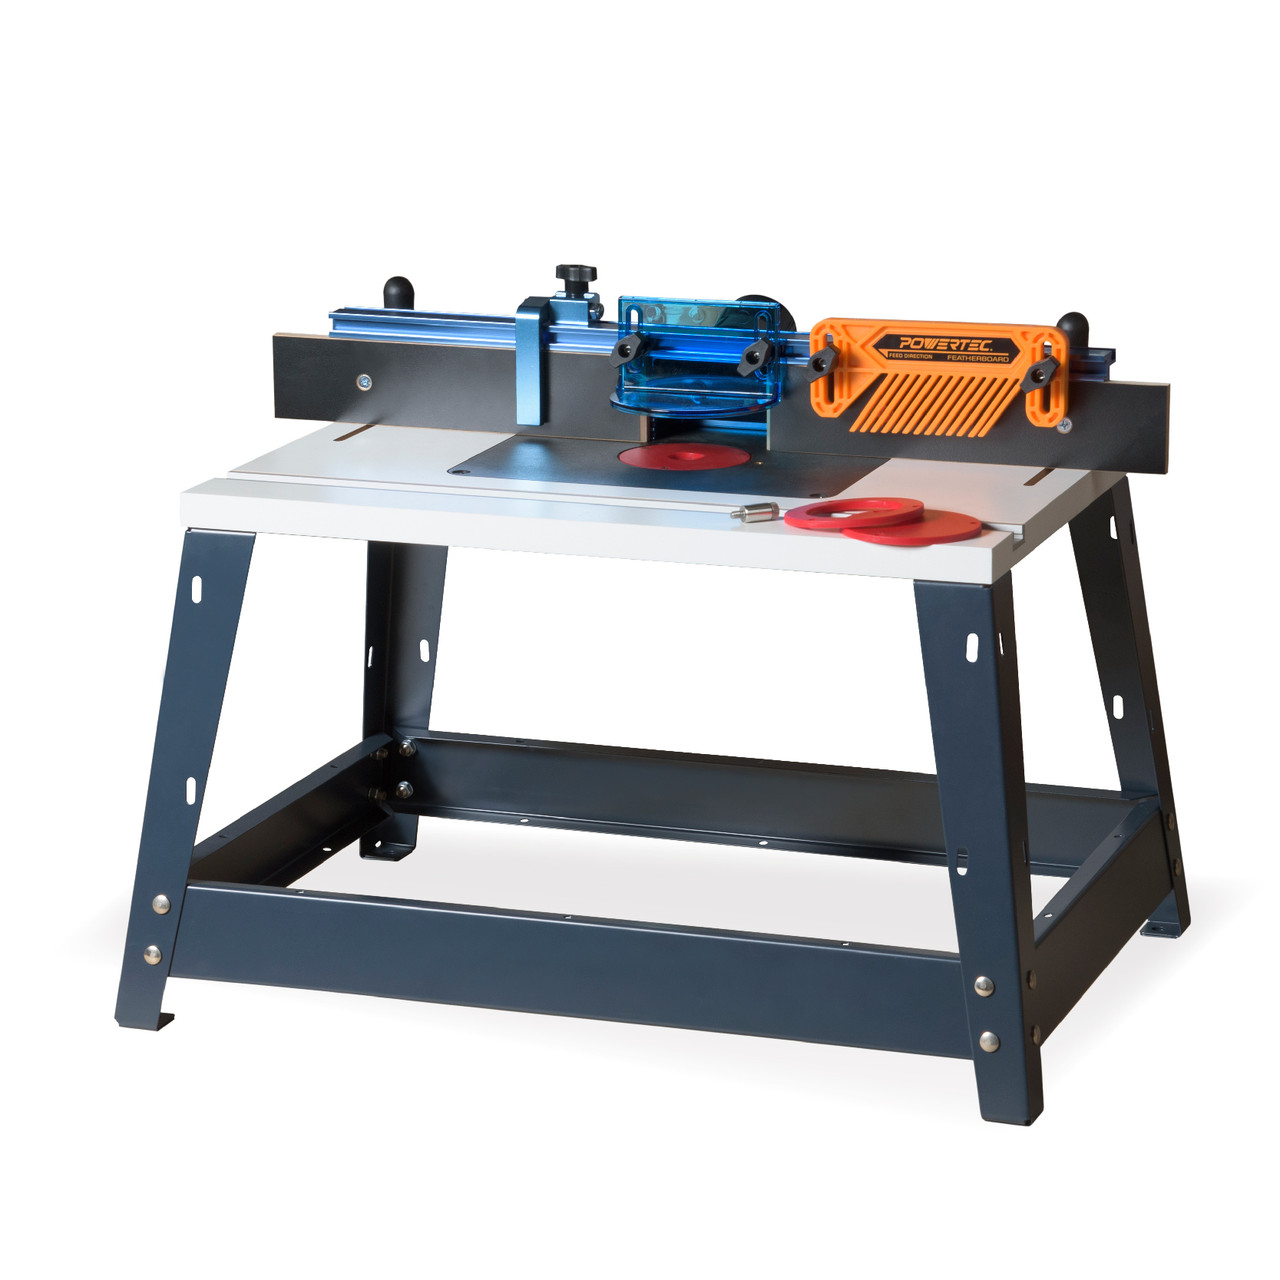 Bench Top Router Table and Fence Set POWERTEC 71402 Woodwork Routing Tools   Accessories